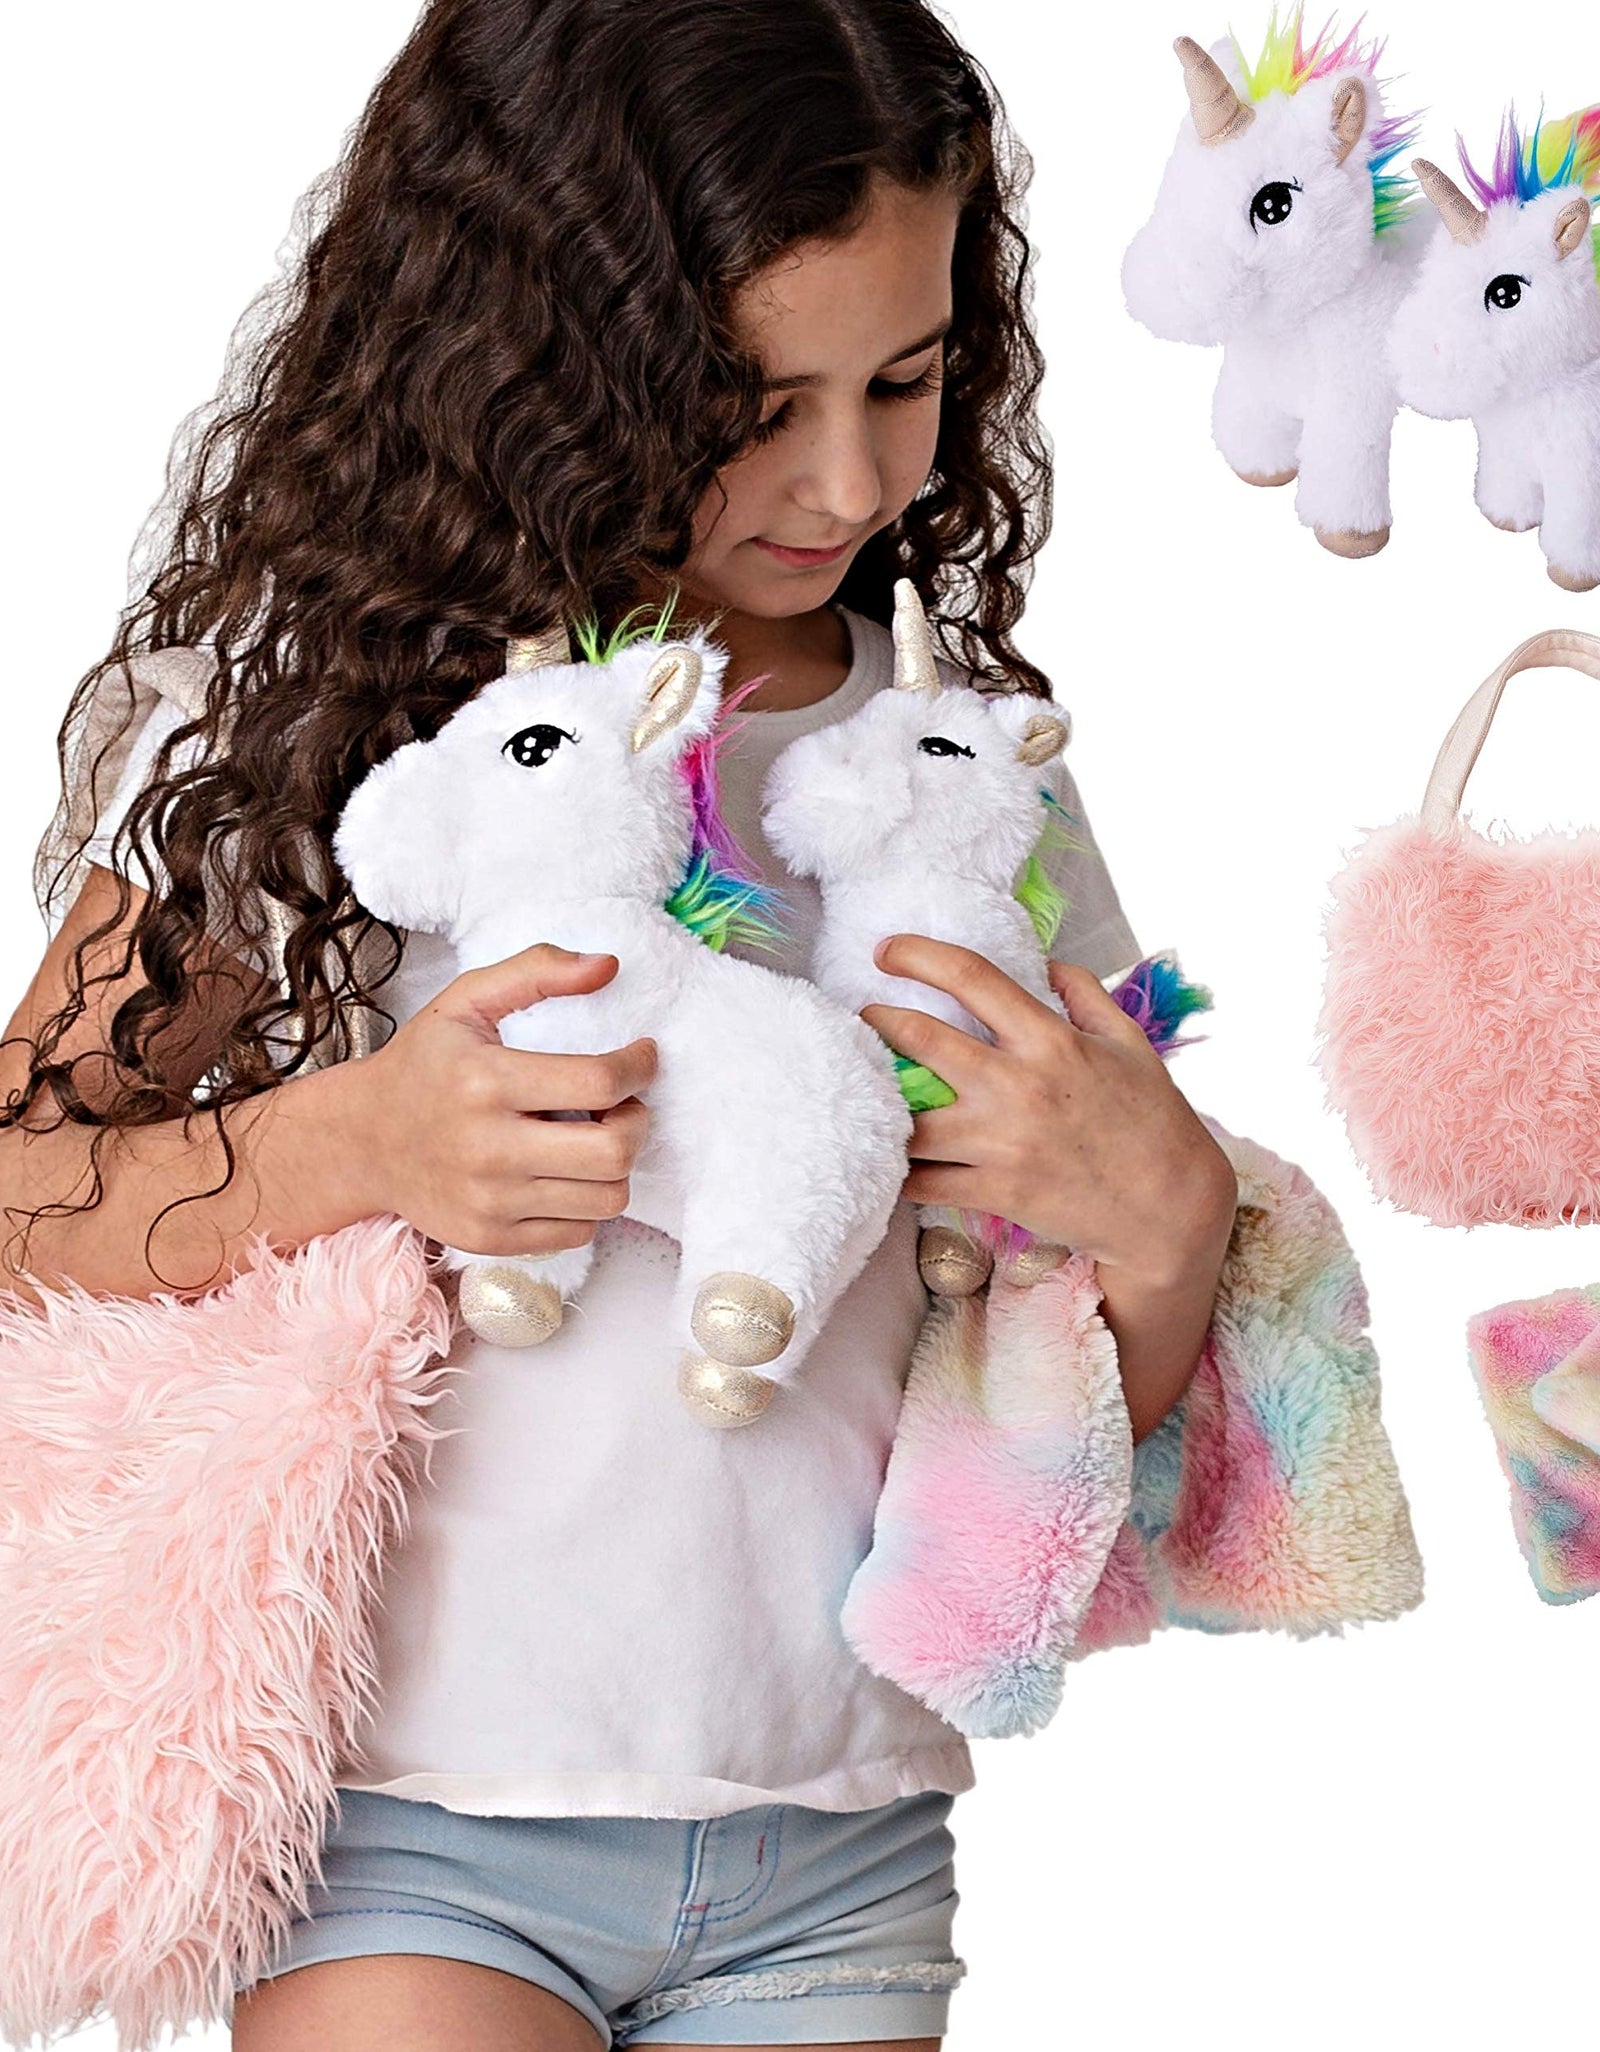 Unicorn Gift for Girls 4 Pcs Set. Baby and Mommy Unicorn Toy, XL Furry Bag and Baby Doll Blanket. Adorable Plush Toy for 3 4 5 Year Old Girl, Unicorn Gift for Little Girl. Birthday, Christmas Age 2-8